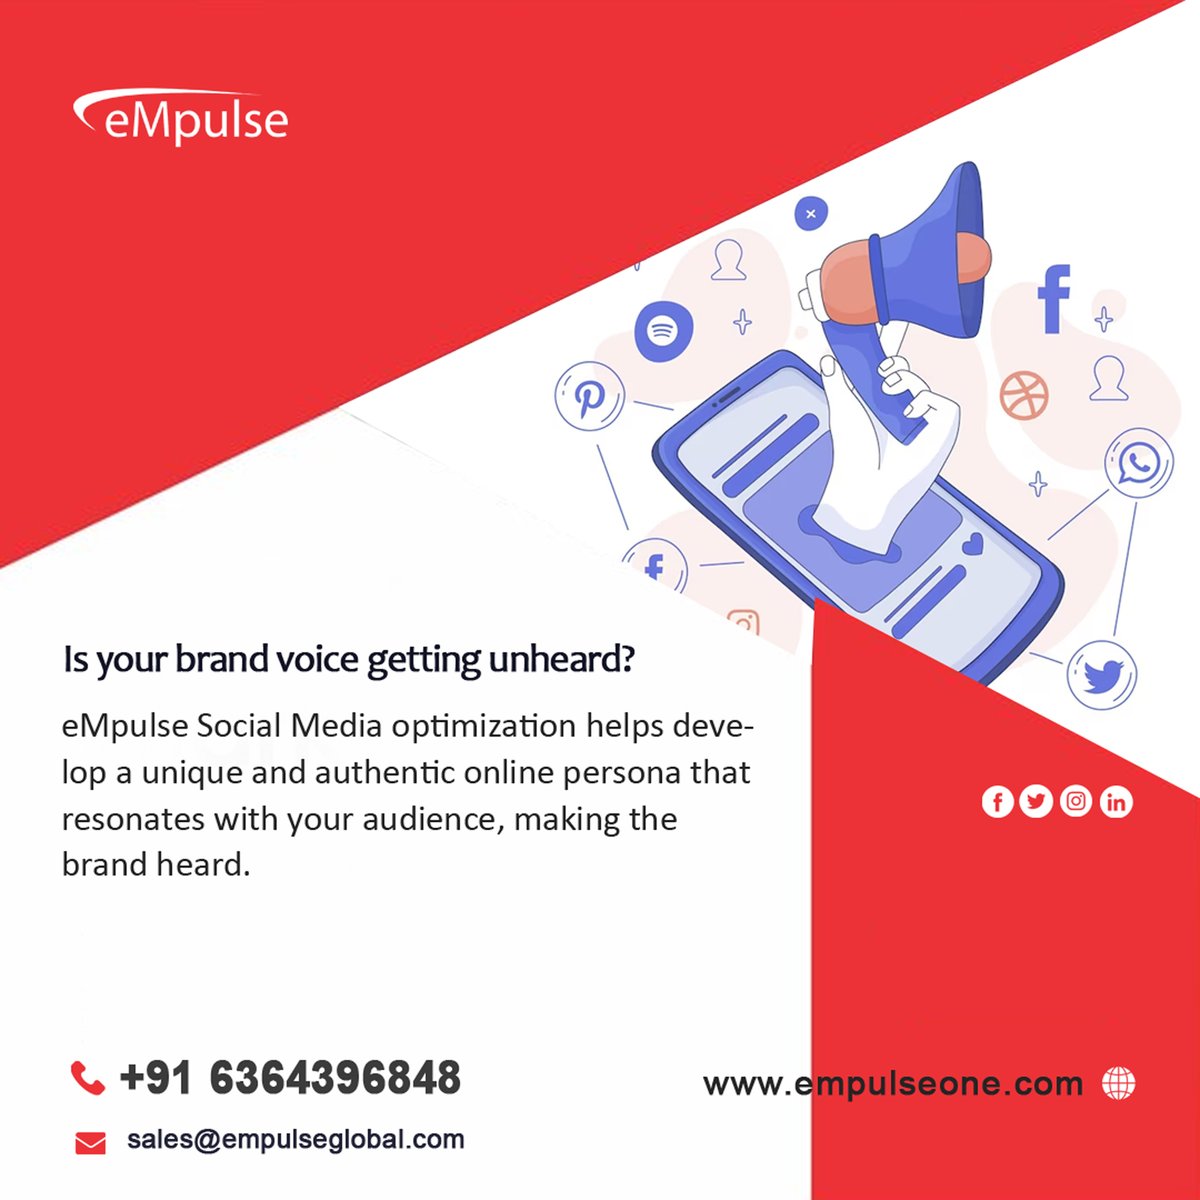 Is your brand voice getting unheard? eMpulse Social Media optimization helps develop a unique and authentic online persona that resonates with your audience, making the brand heard. Visit: empulseglobal.com #empulseglobal #socialmediaoptimization #SMO #BrandVisibility